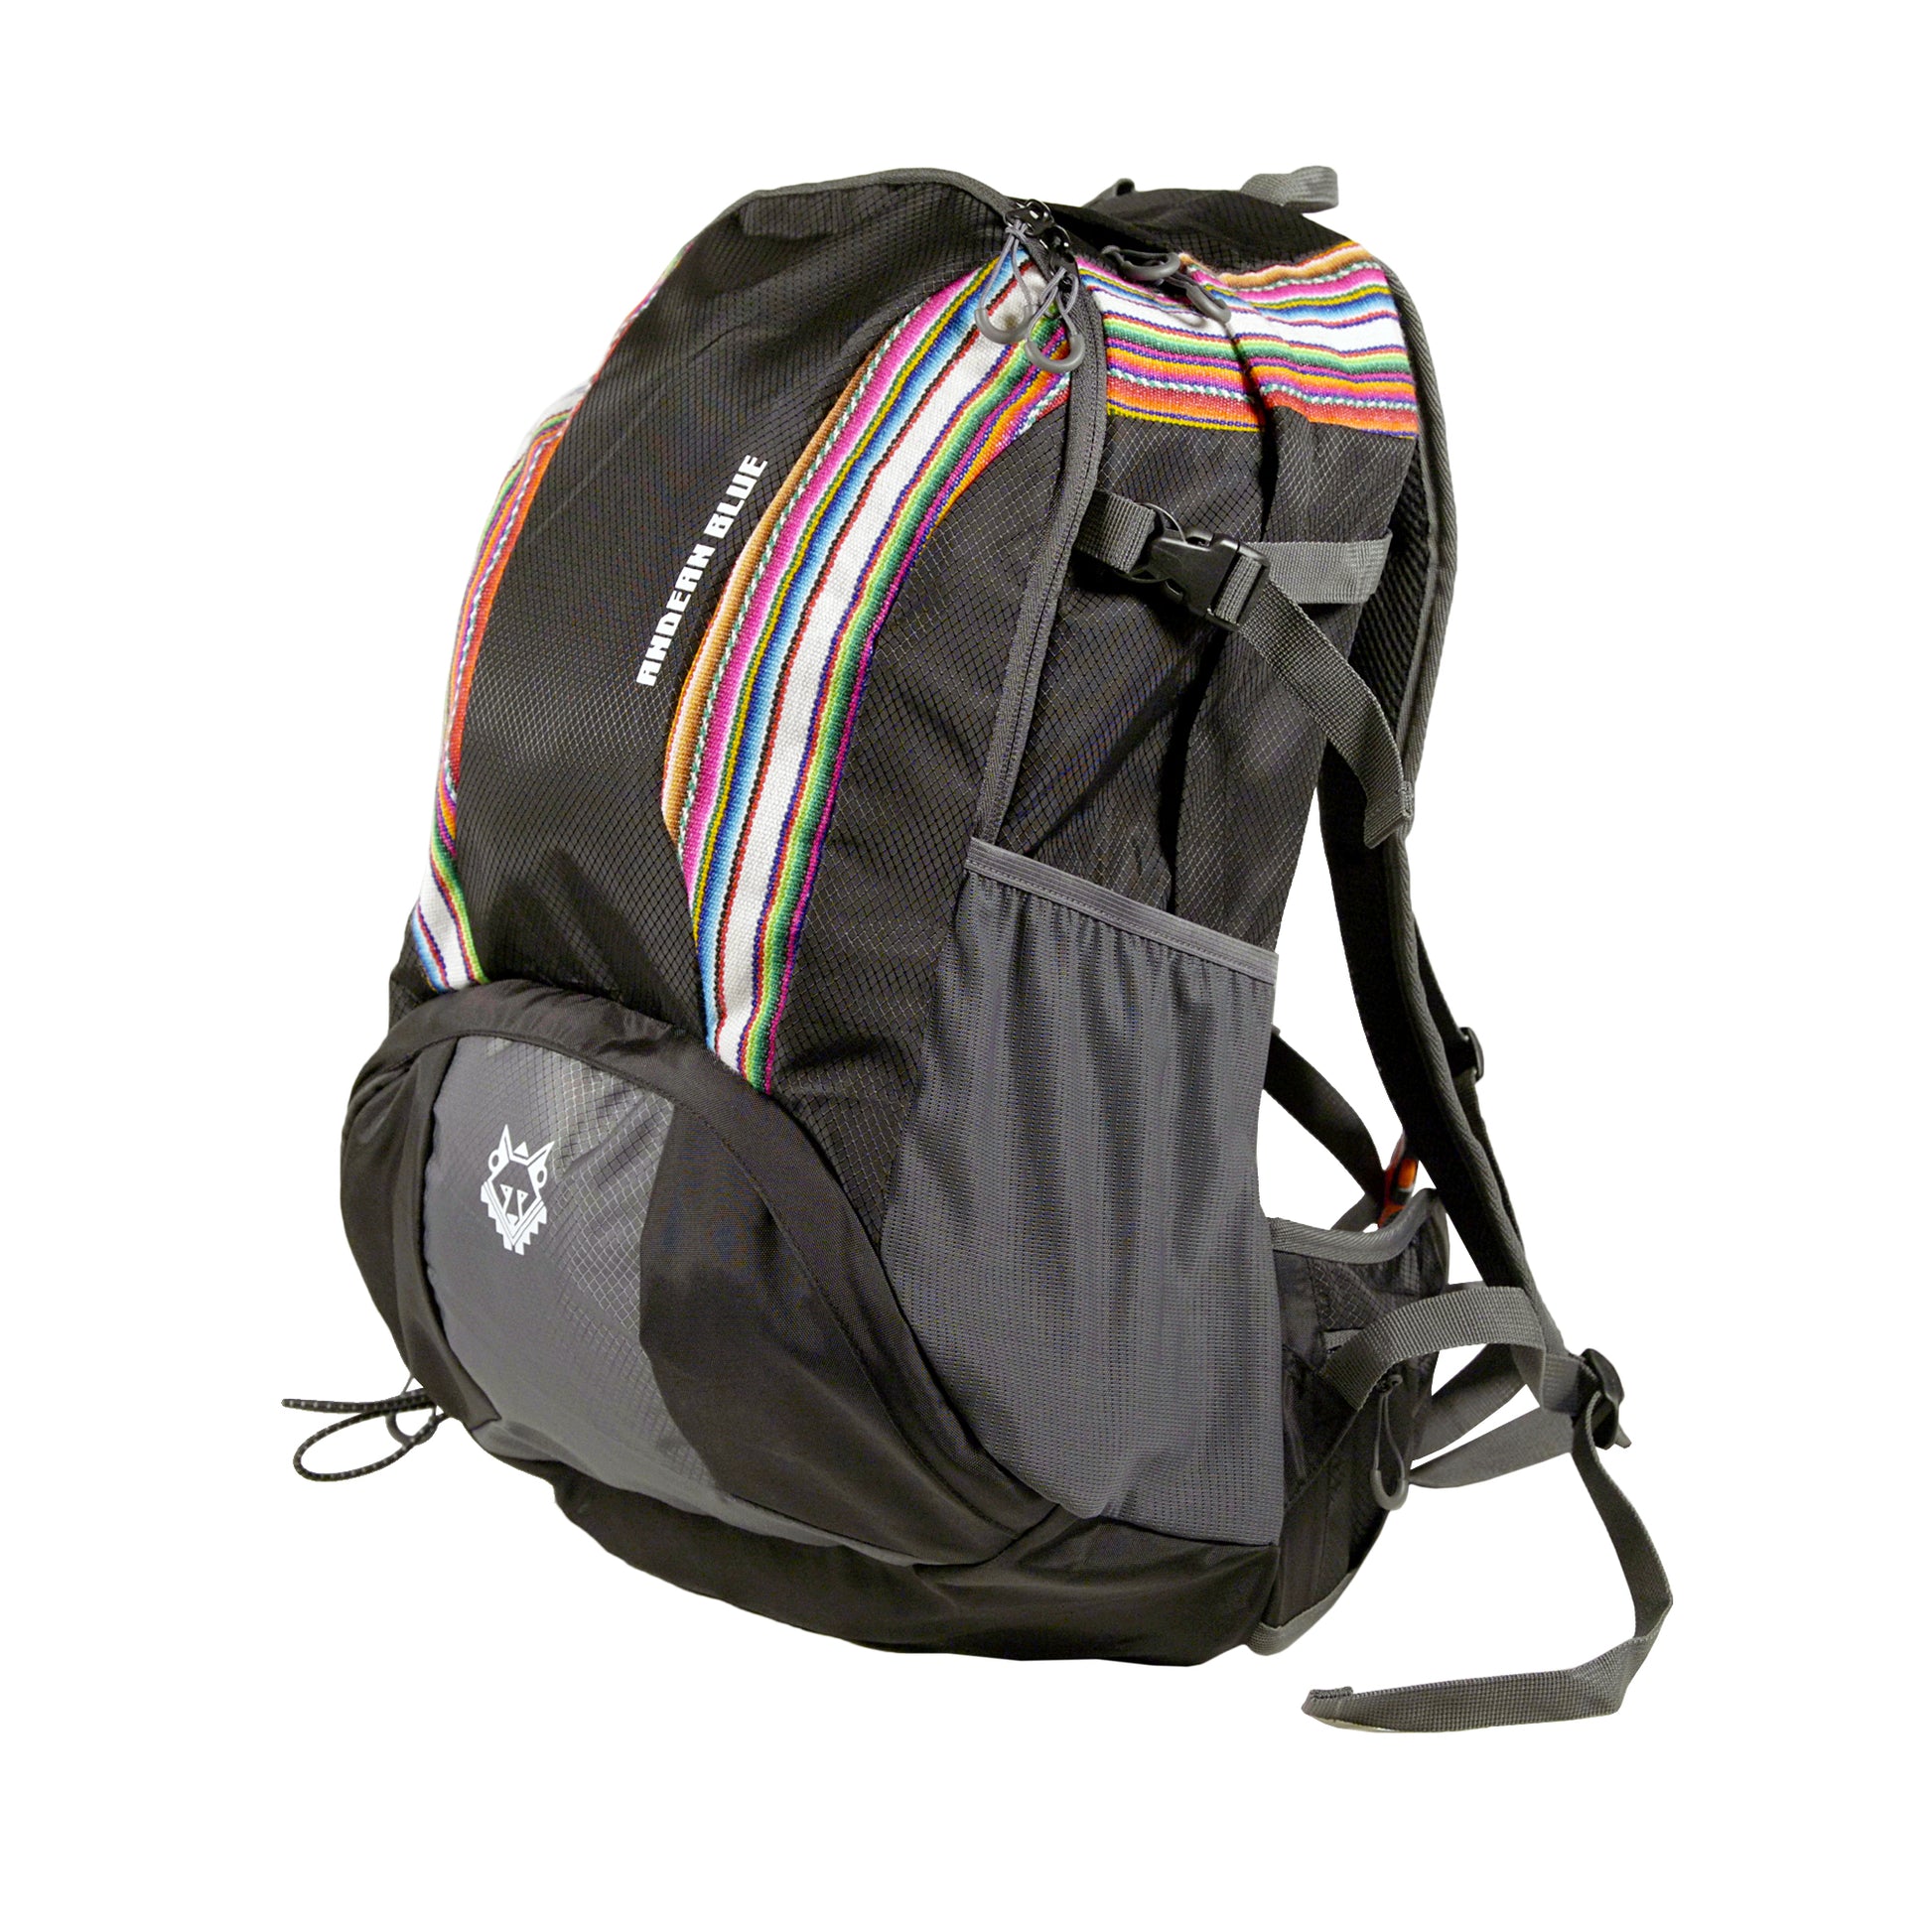 White Wanderer | Andean Blue Wanderer | Water Resistant Hiking Backpack | AndeanBlue